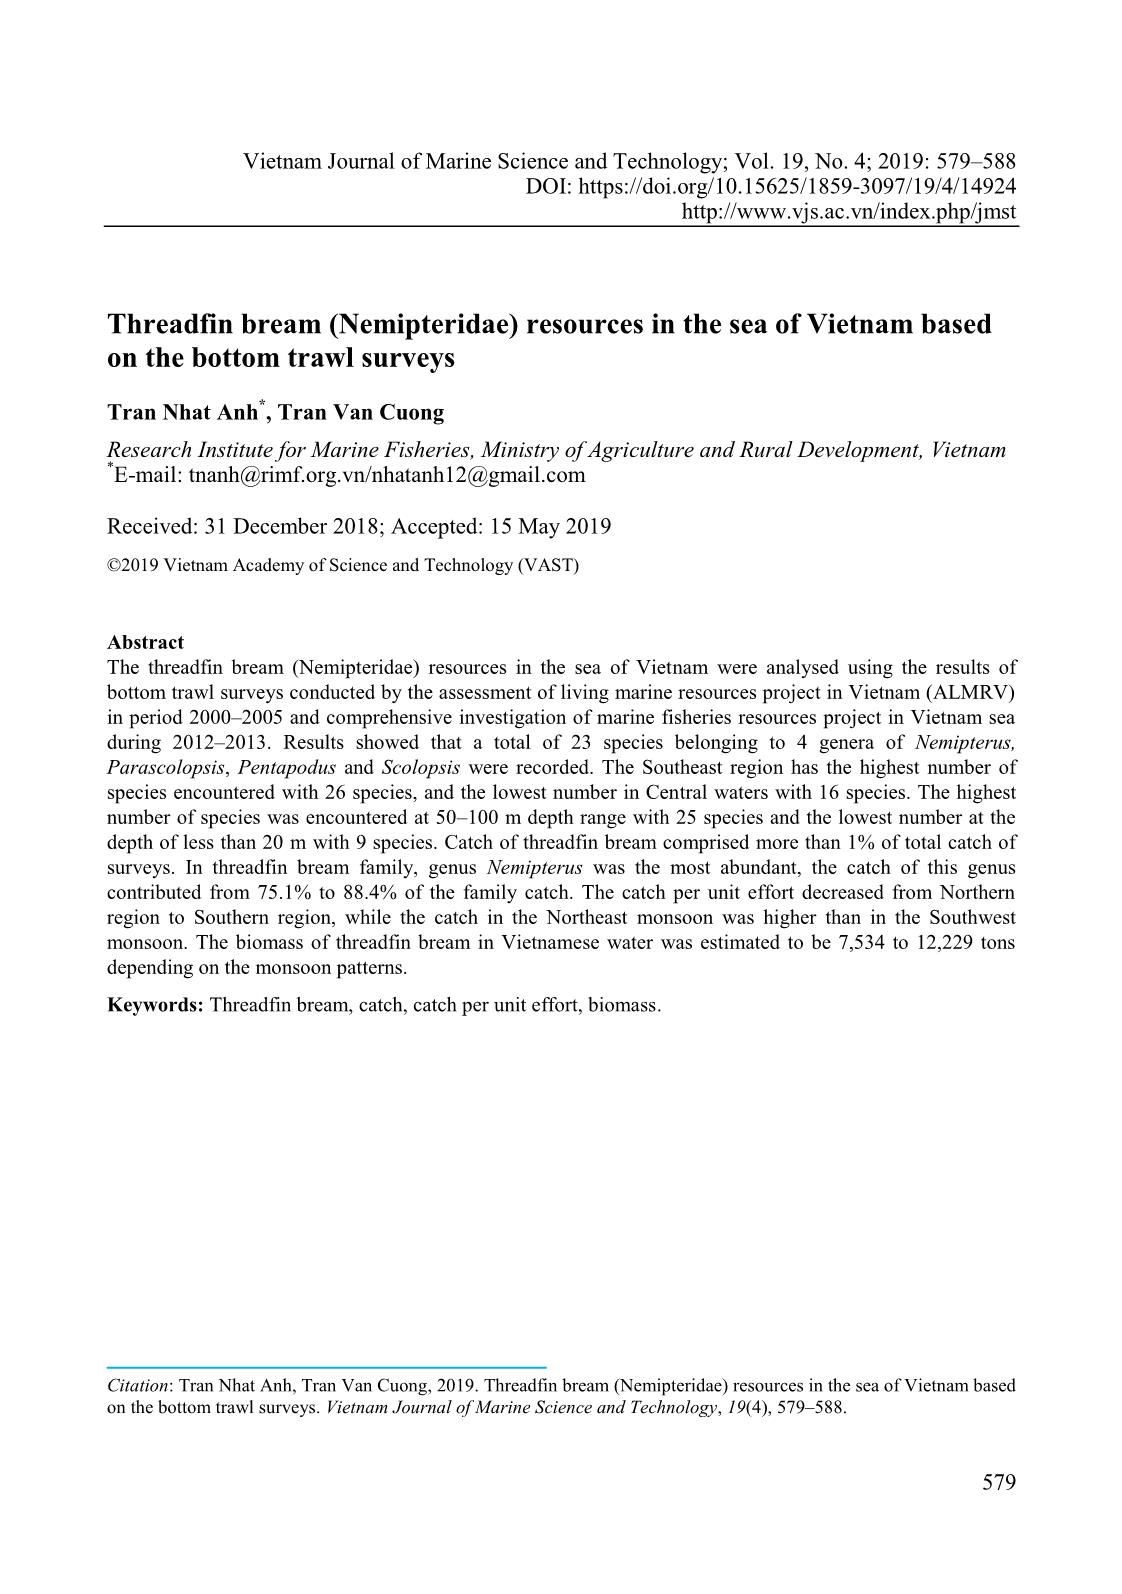 Threadfin bream (Nemipteridae) resources in the sea of Vietnam based on the bottom trawl surveys trang 1